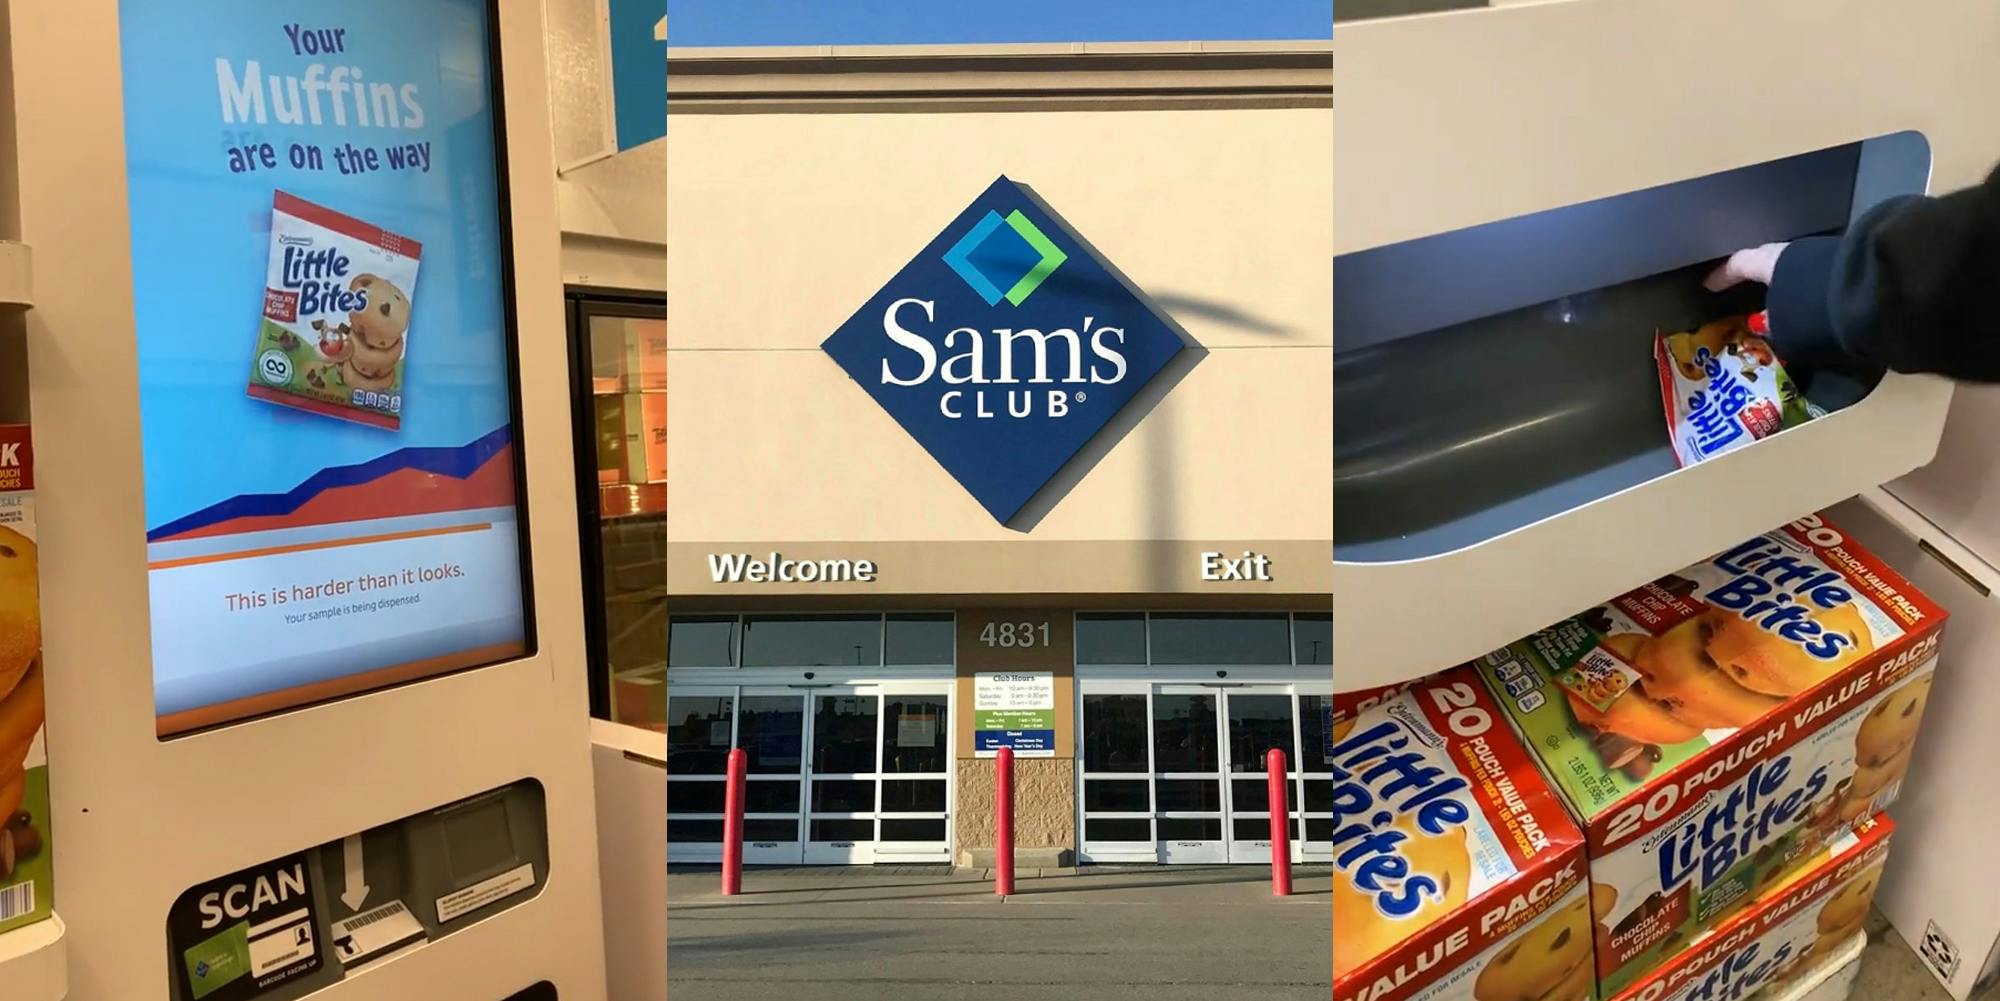 Sam's Club samples machine for Little Bites with caption on screen "This is harder than it looks." (l) Sam's club sign on building (c) Sam's Club customer grabbing Little Bites sample from machine (r)